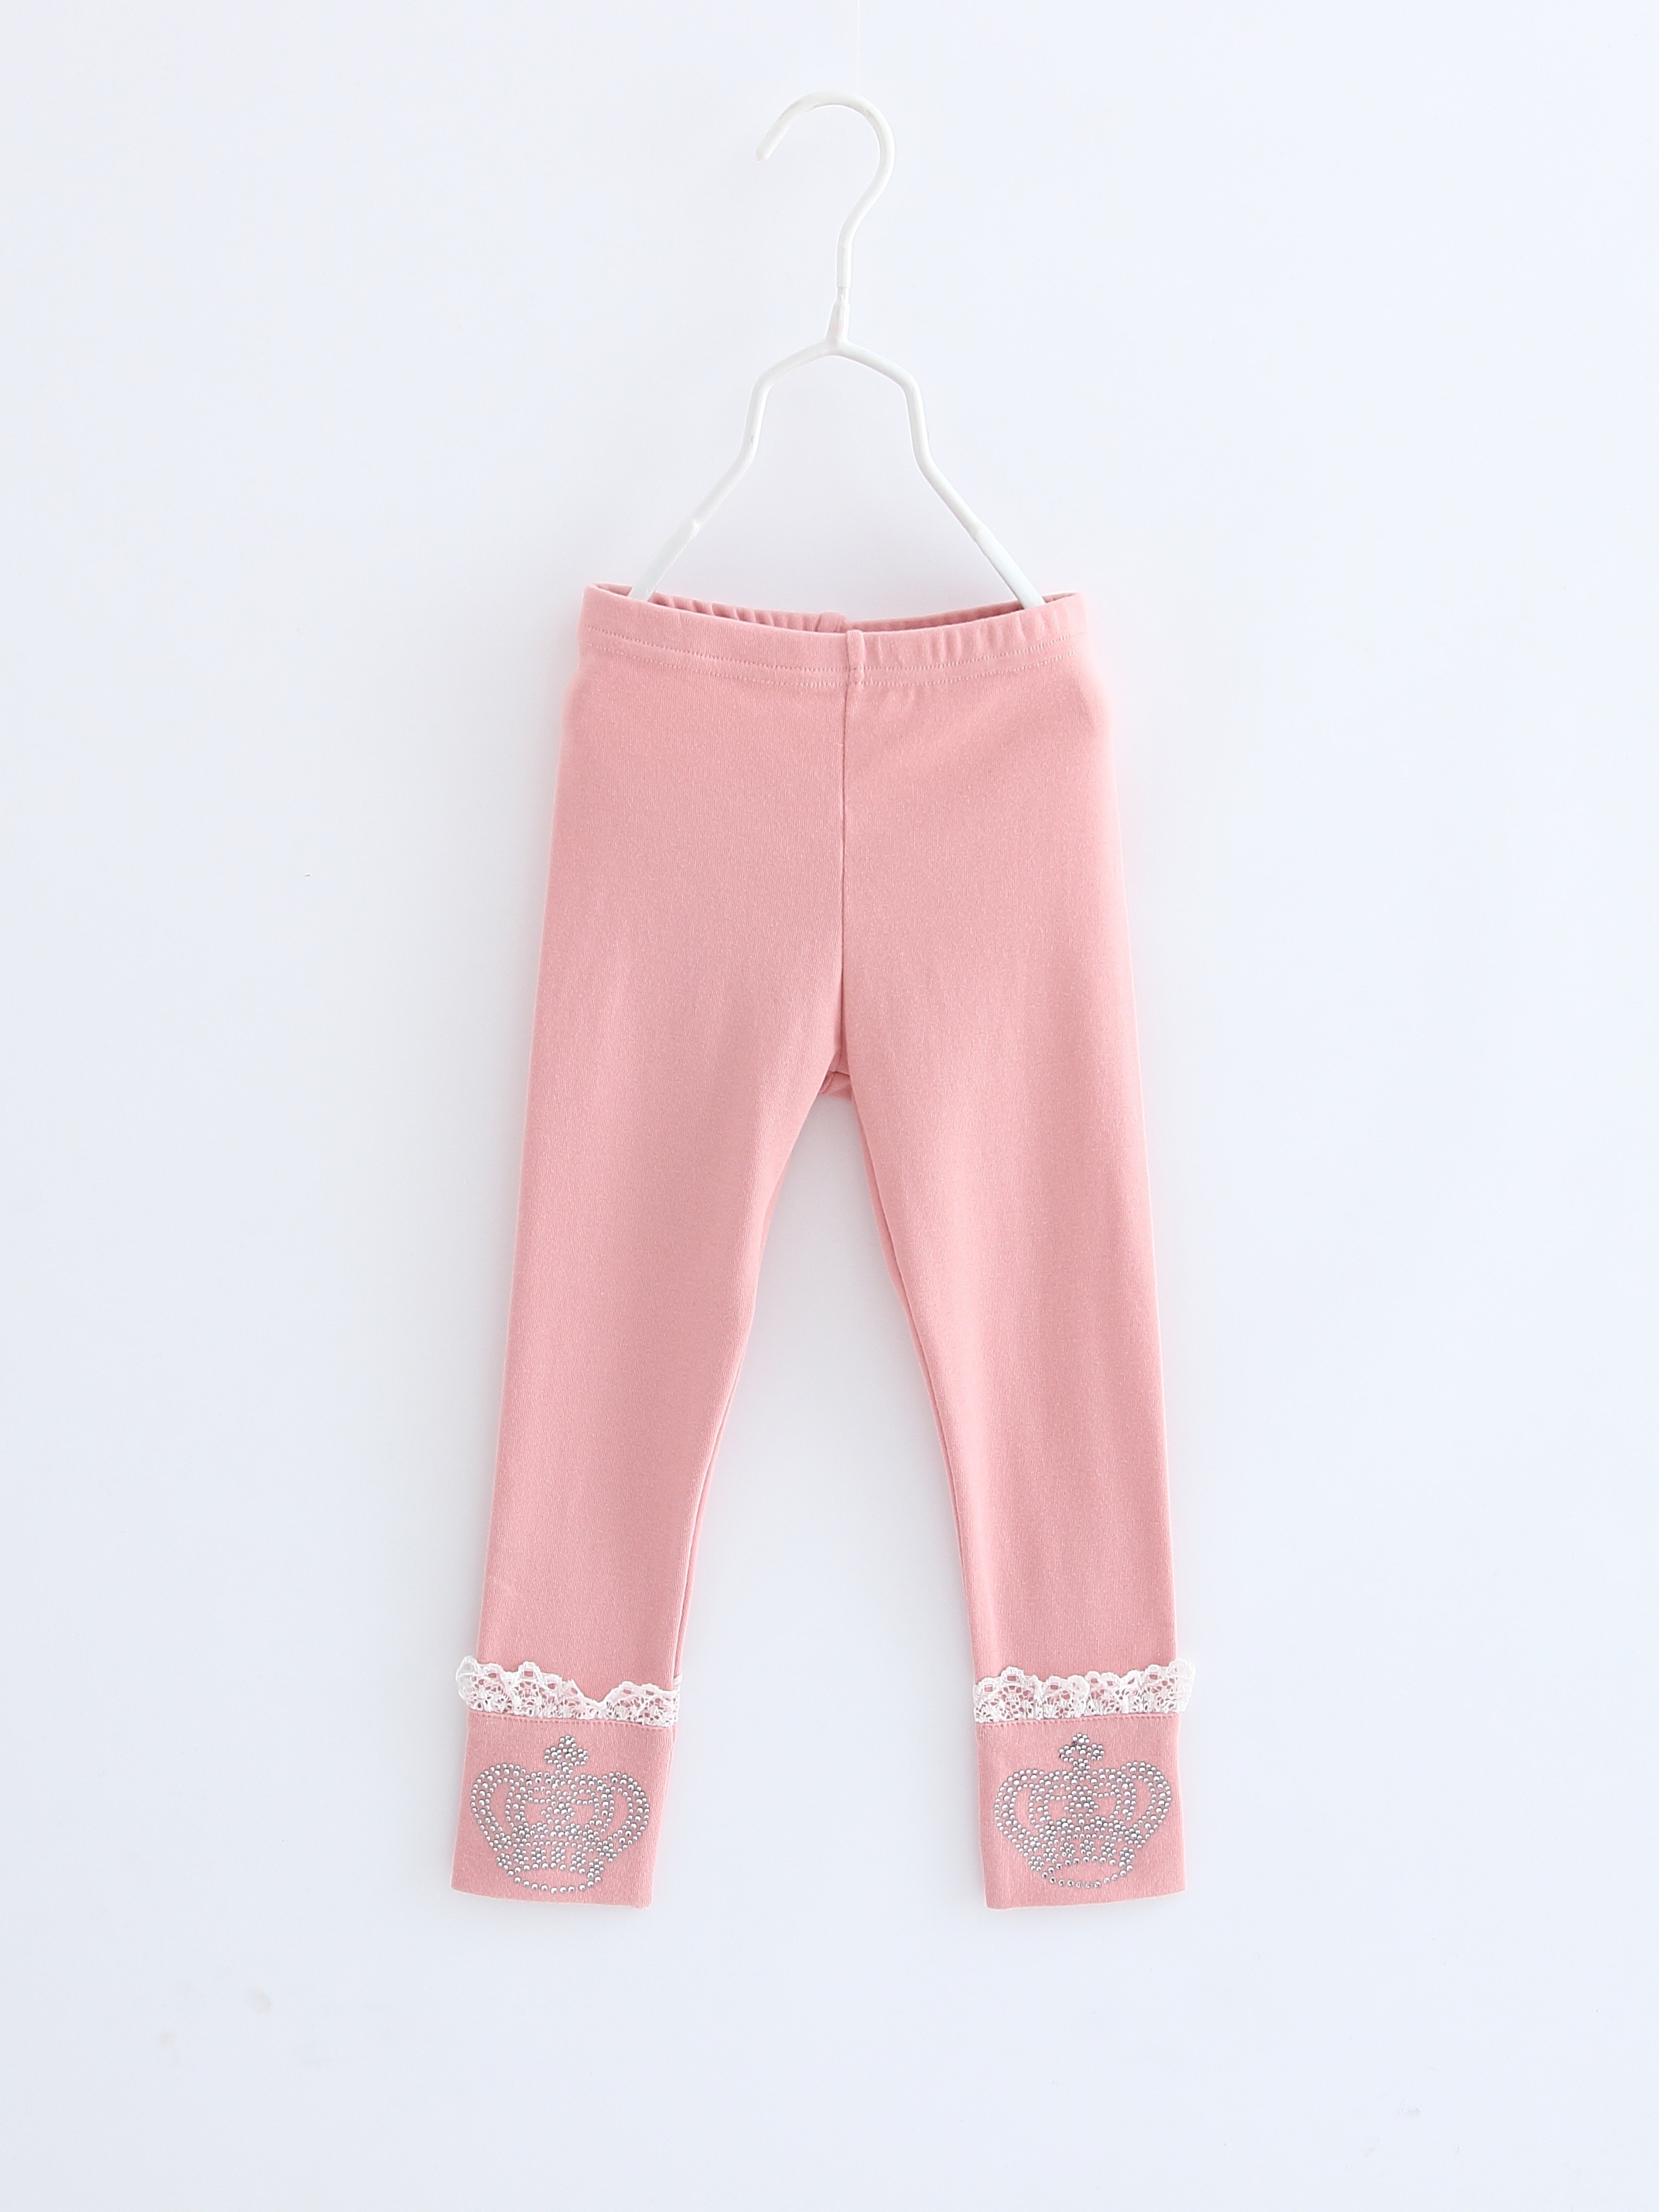 Baby Girl Pale Pink Lace Leggings